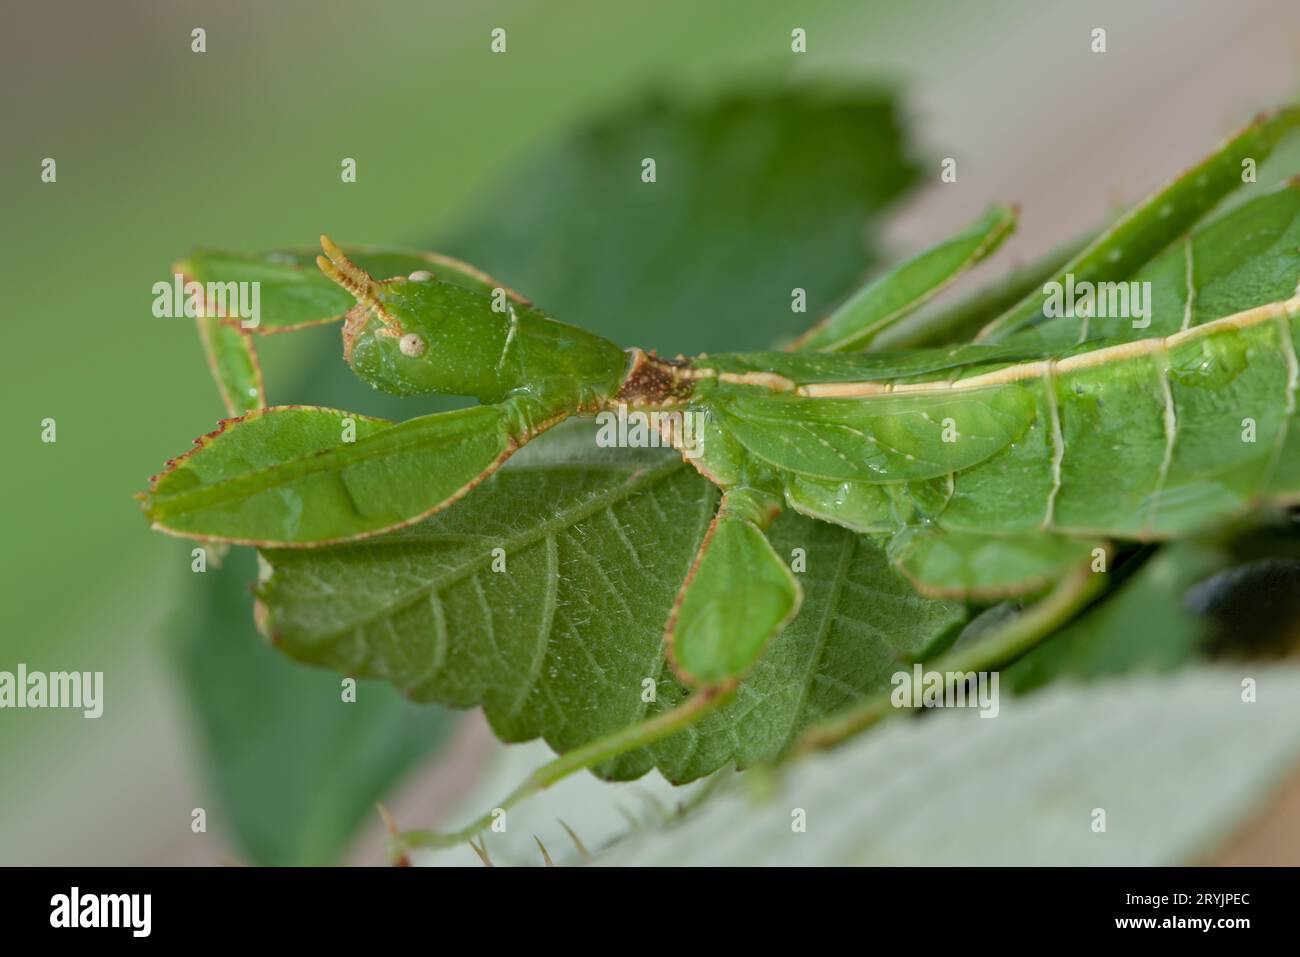 Detail of eye and antenna of leaf insect Phyllium. Young nymph few months old. Ideal terrarium pet for children. Stock Photo